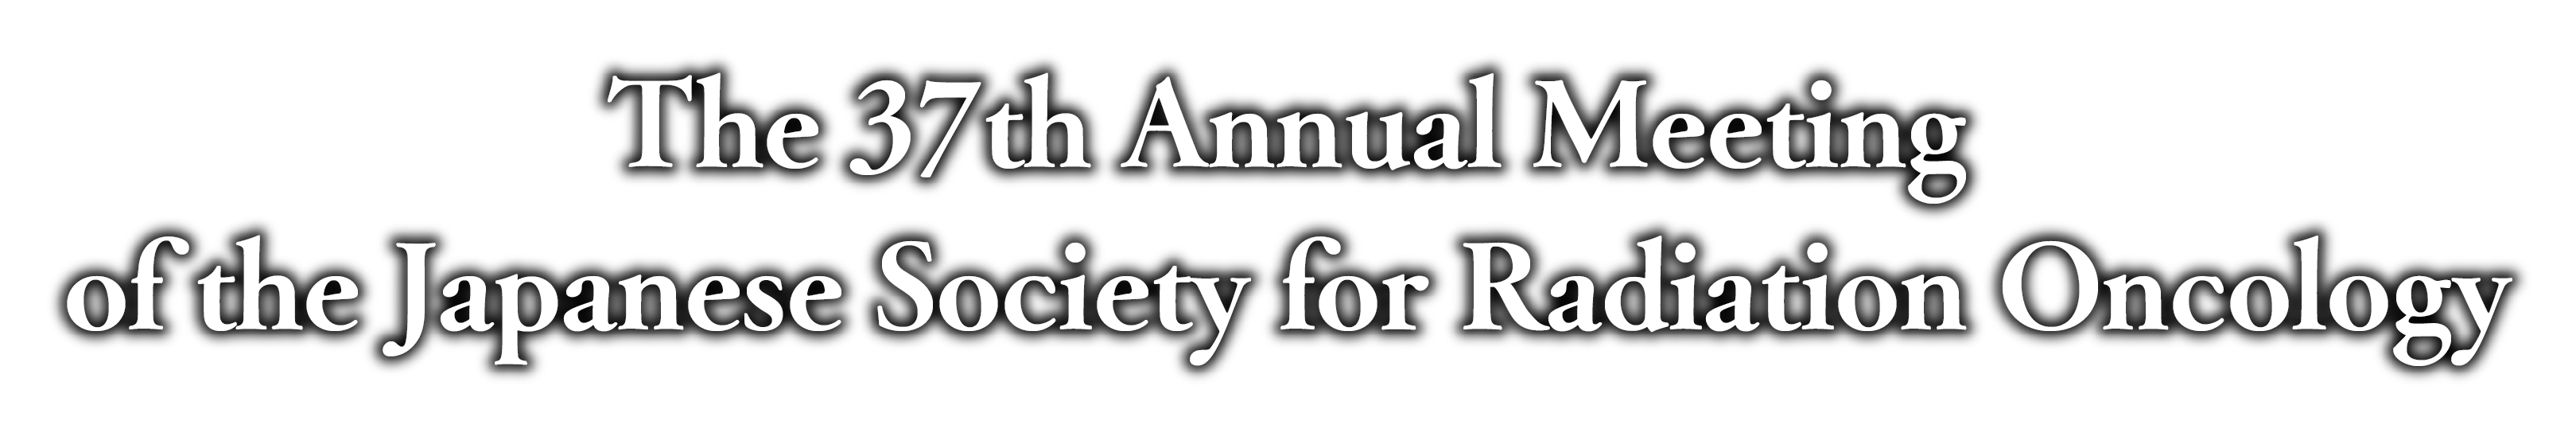 The 37th Annual Meeting of the Japanese Society for Radiation Oncology